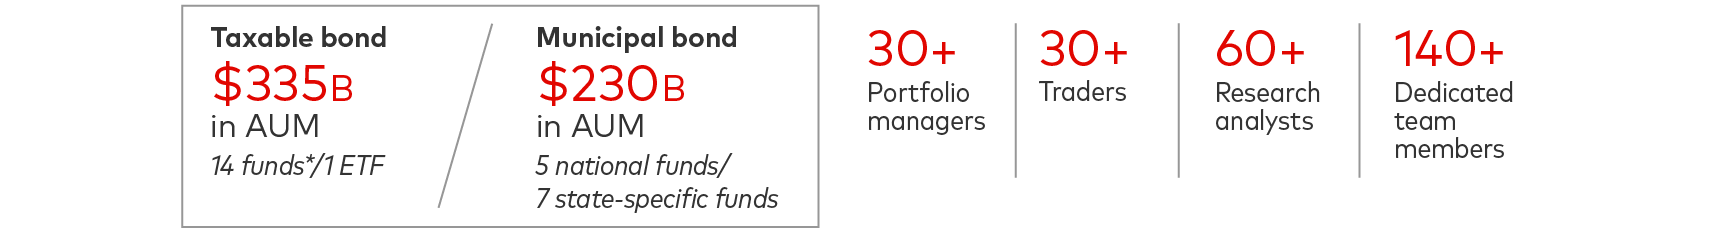 The chart shows that Vanguard’s active Fixed Income Group manages $335 billion in taxable bonds and $230 billion in municipal bonds. The active management team includes more than 30 portfolio managers, more than 30 traders, more than 60 research analysts, and more than 140 dedicated team members. 